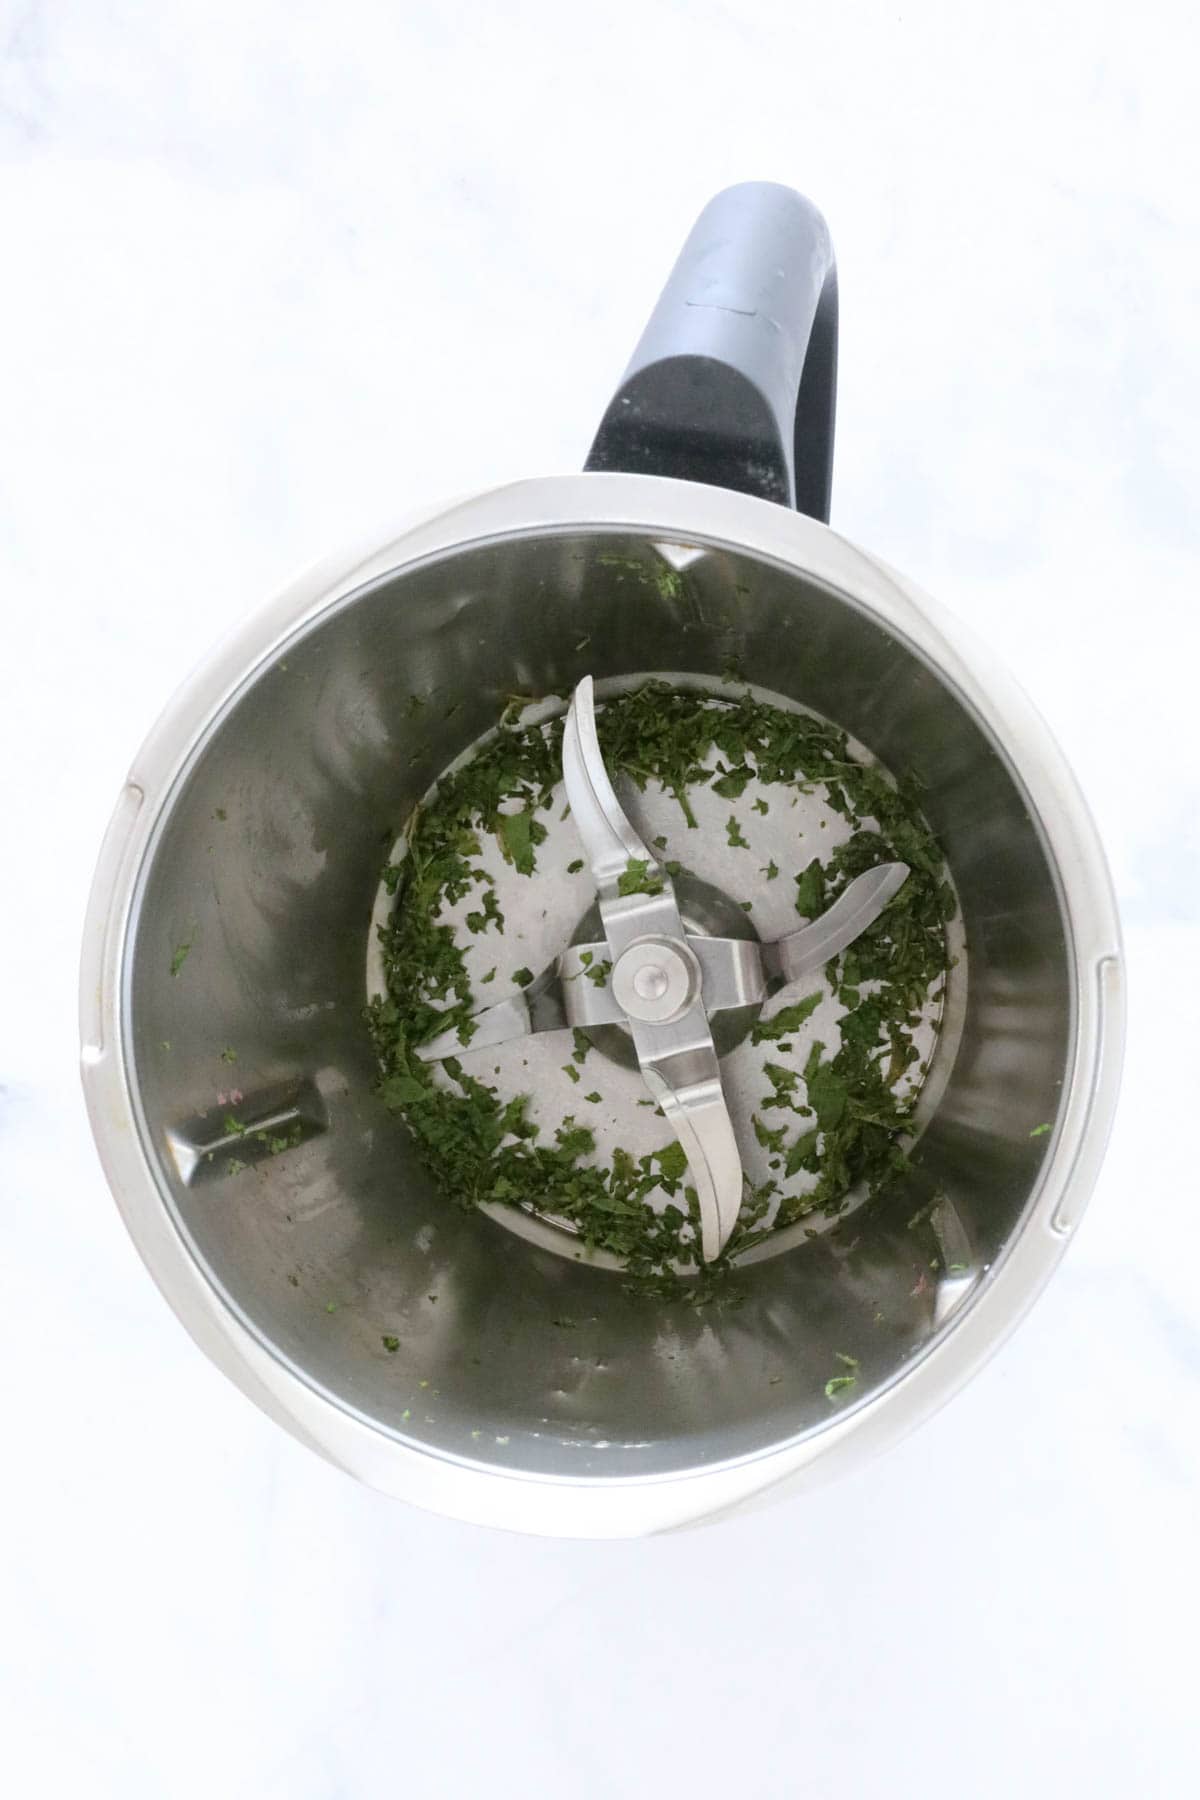 Chopped mint in a Thermomix.